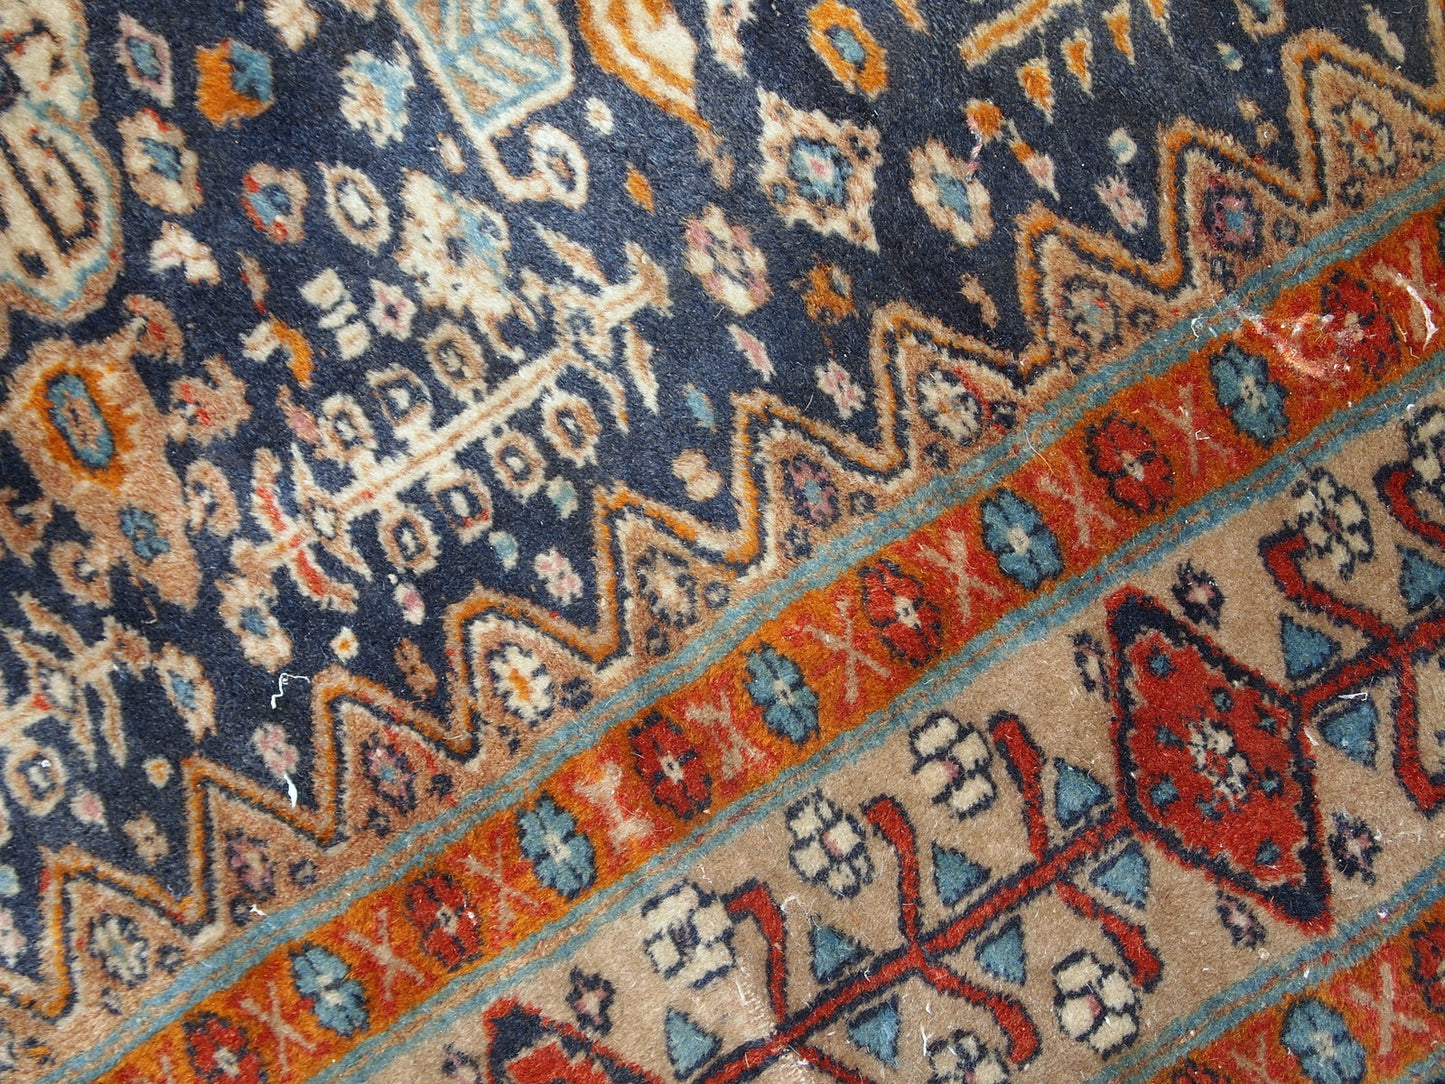 Handmade antique Baluch rug from Central Asia in original condition, it has some age wear. The rug is from the beginning of 20th century.